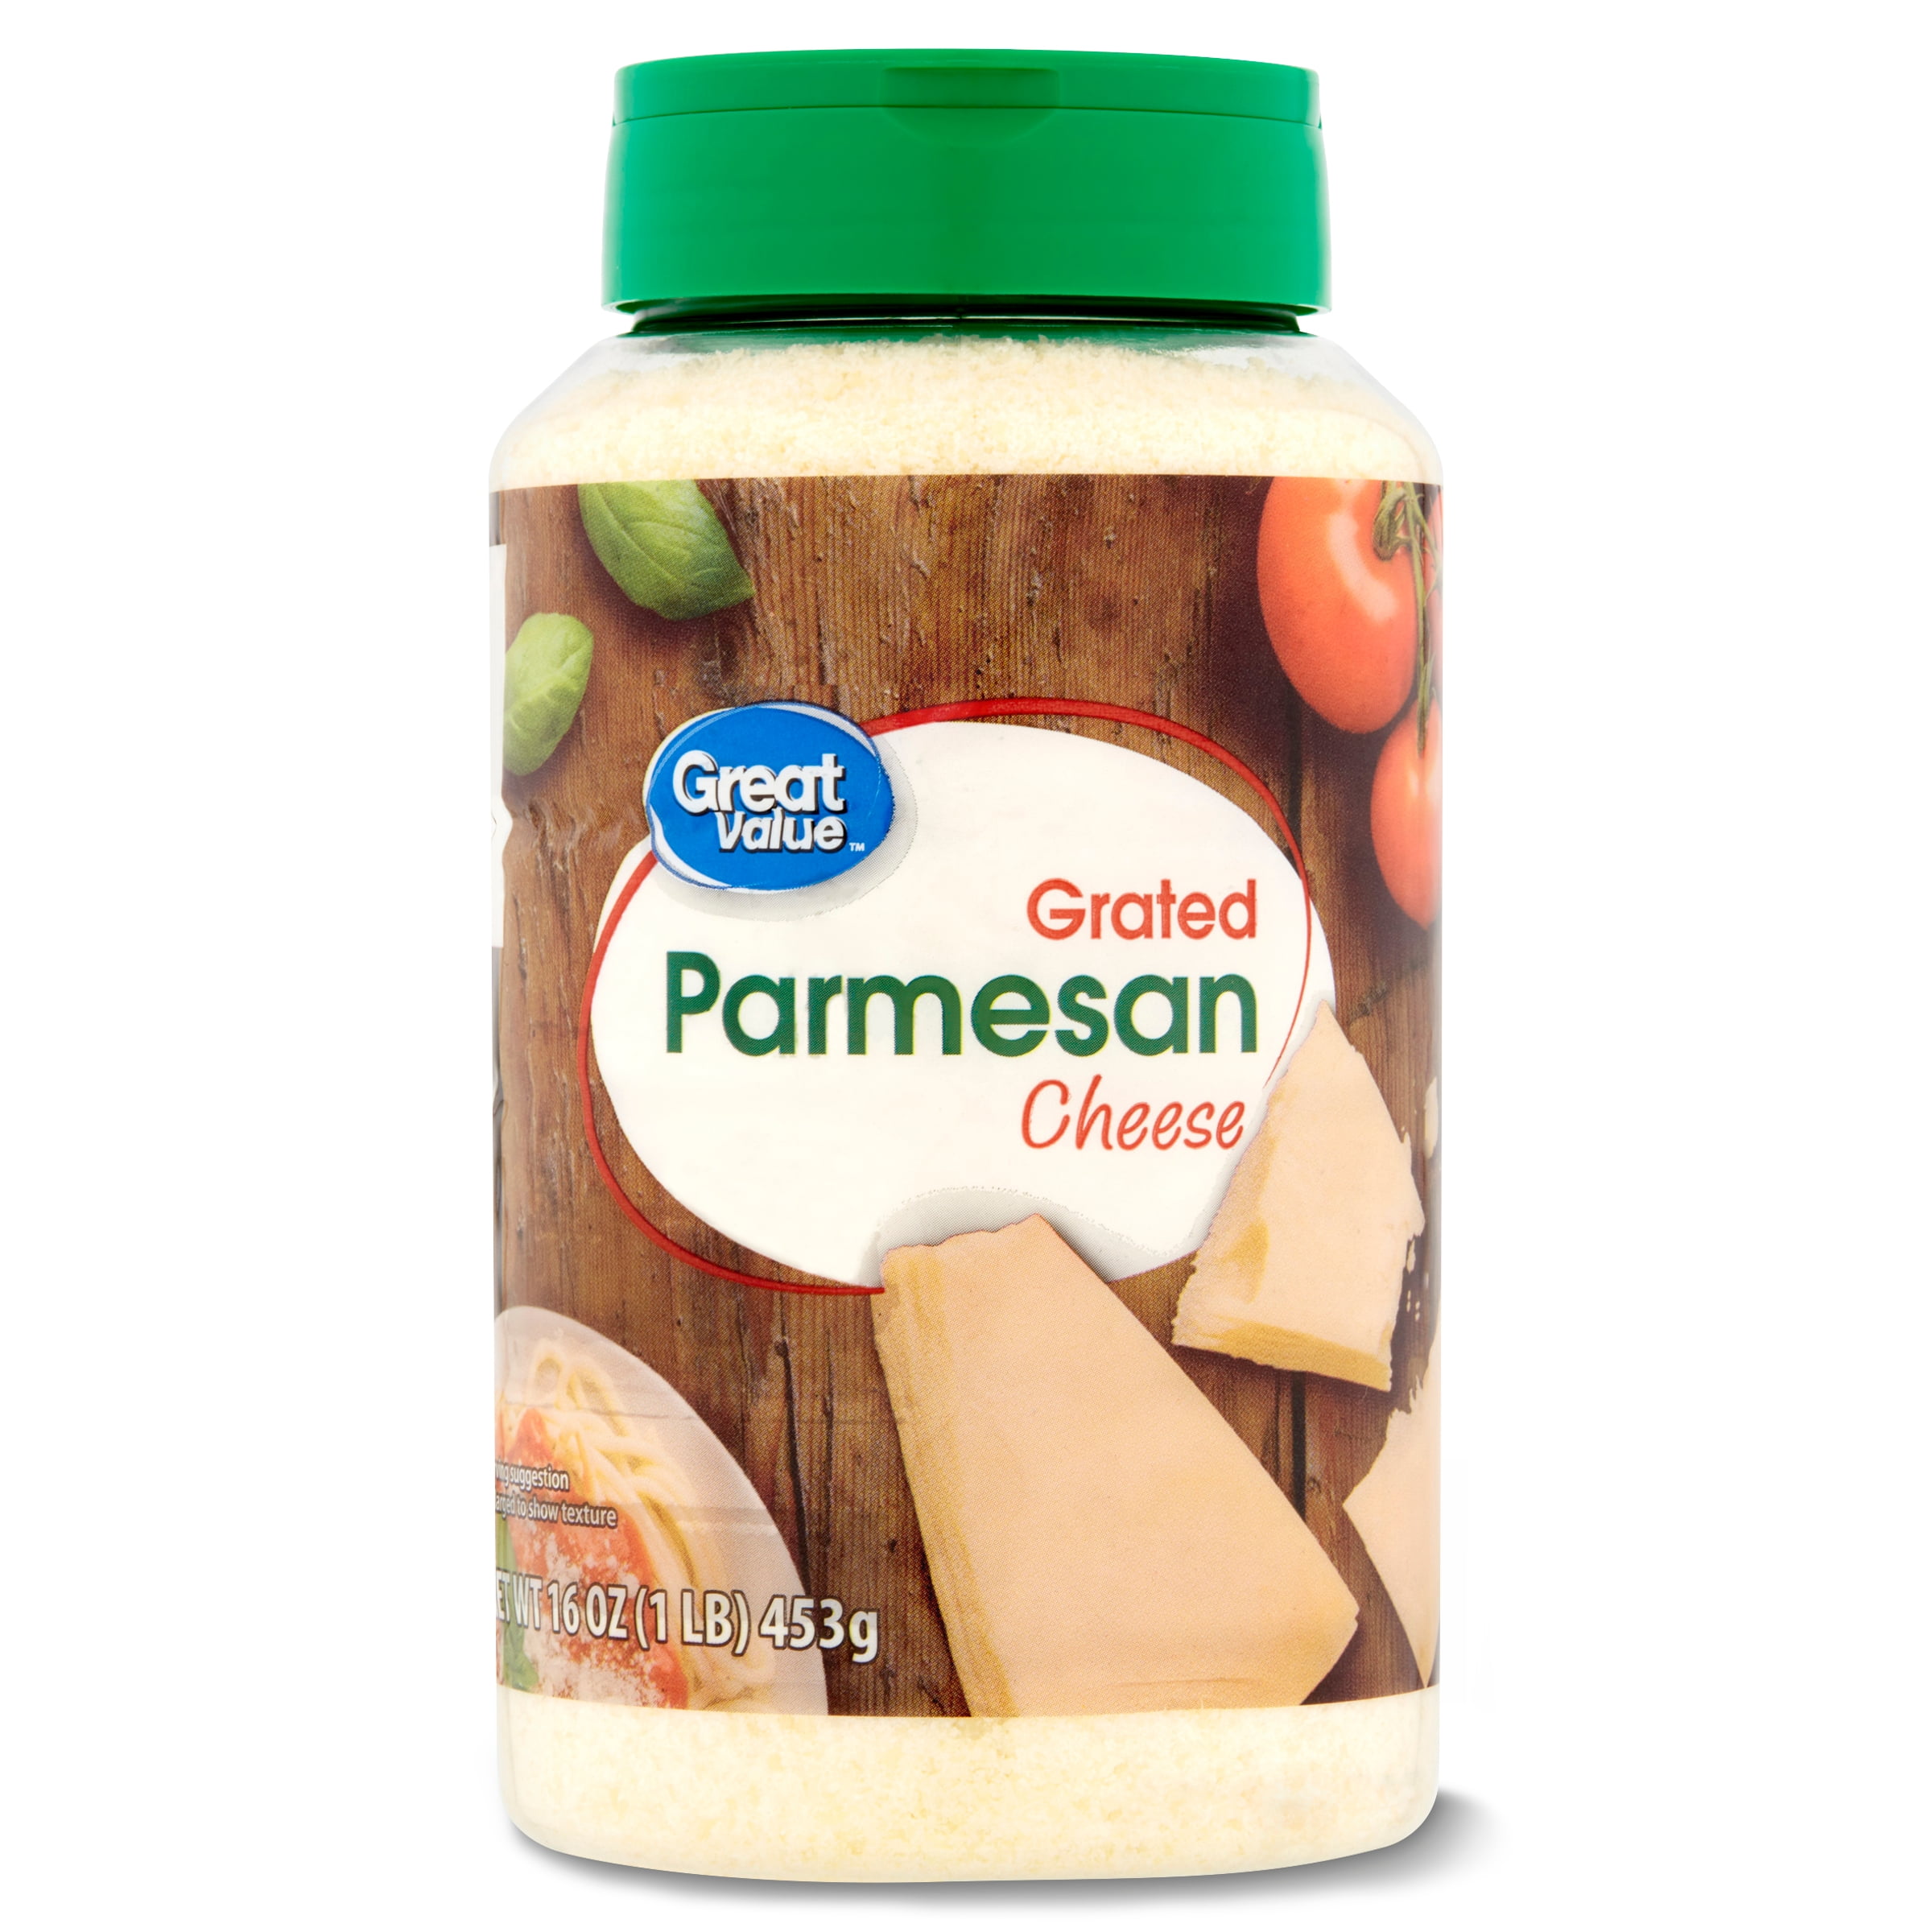 Great Value Grated Parmesan Cheese, 16 oz